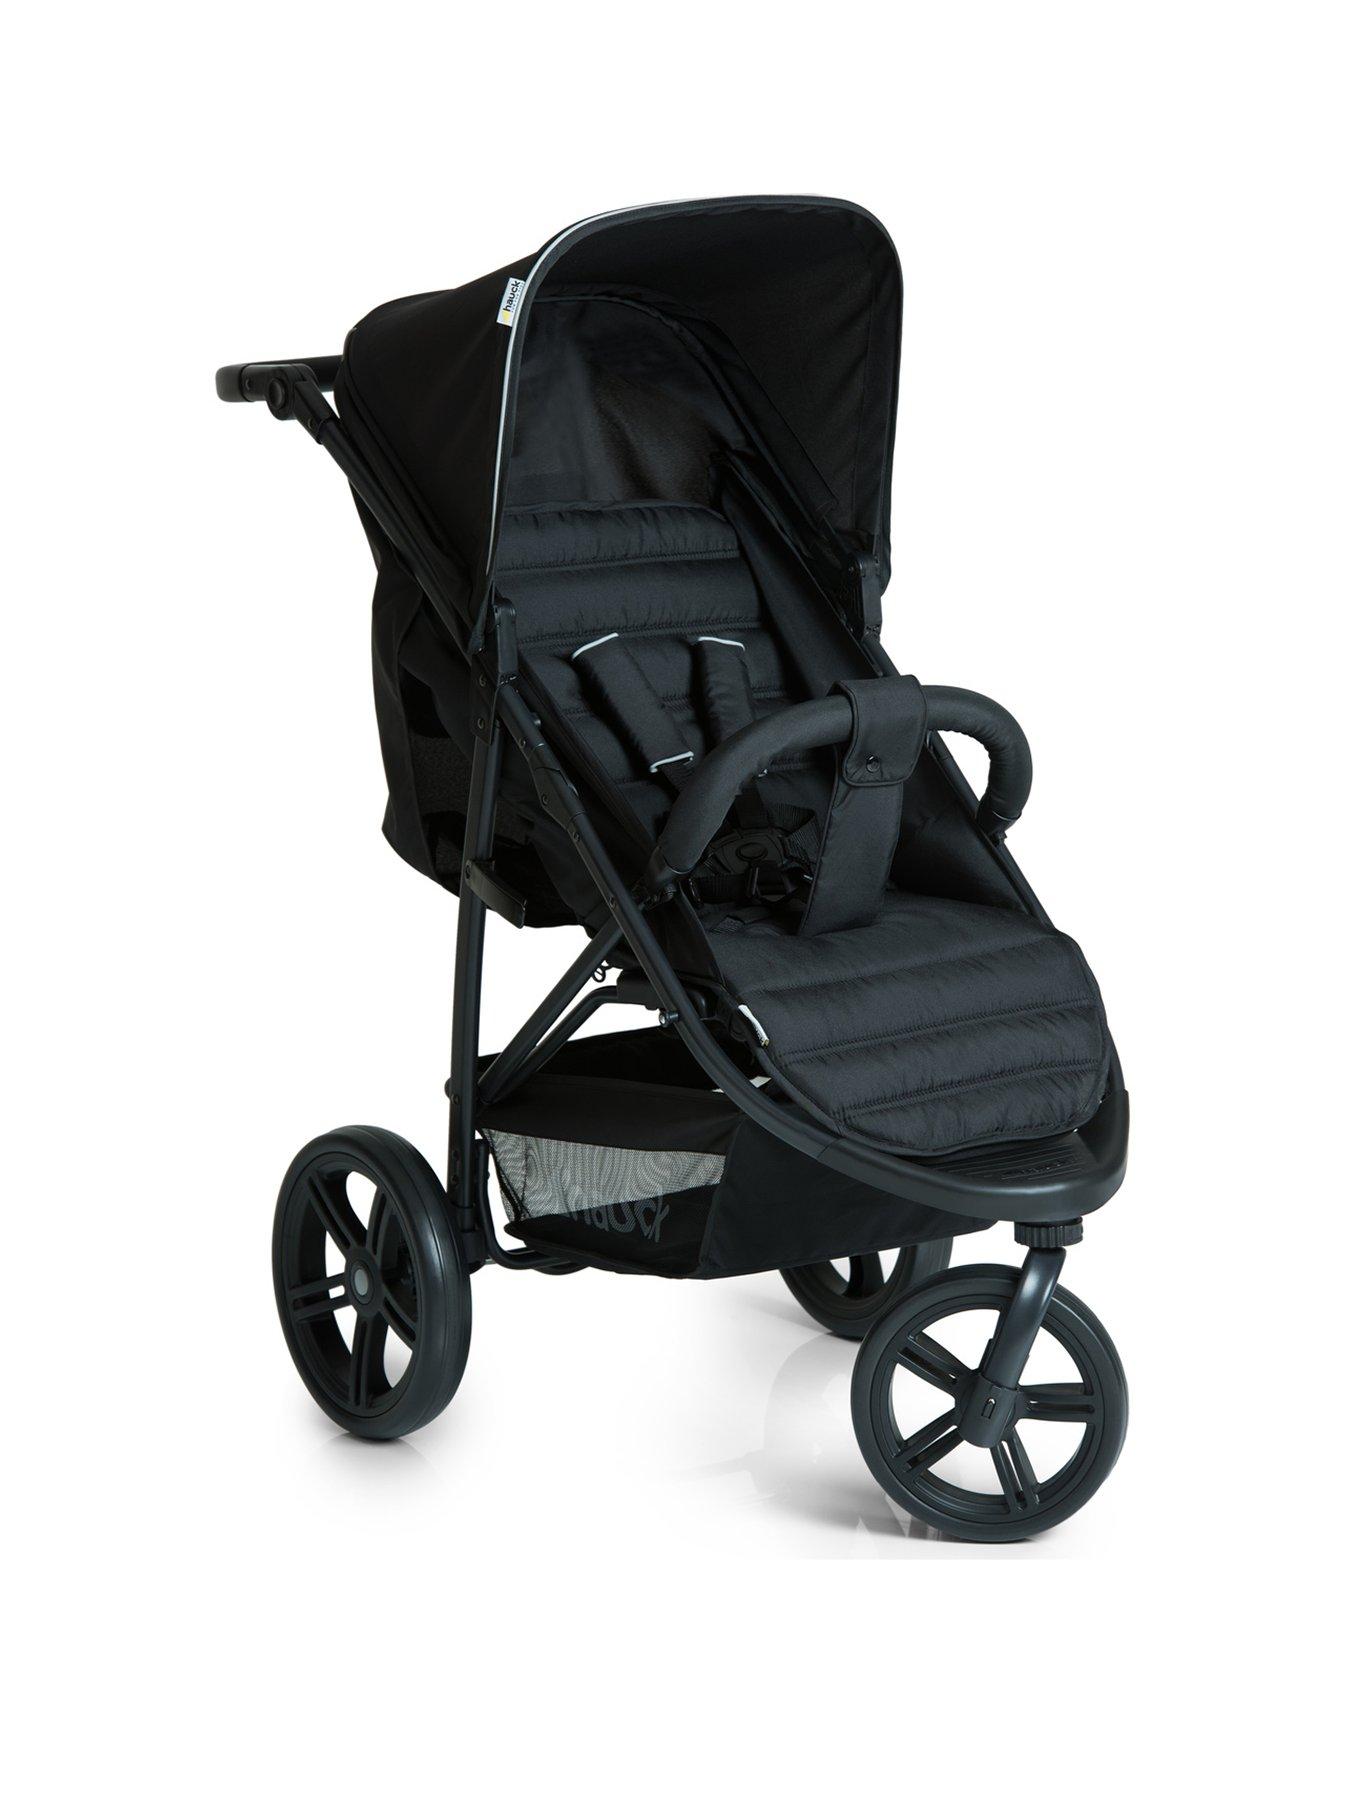 pushchair that turns into a car seat